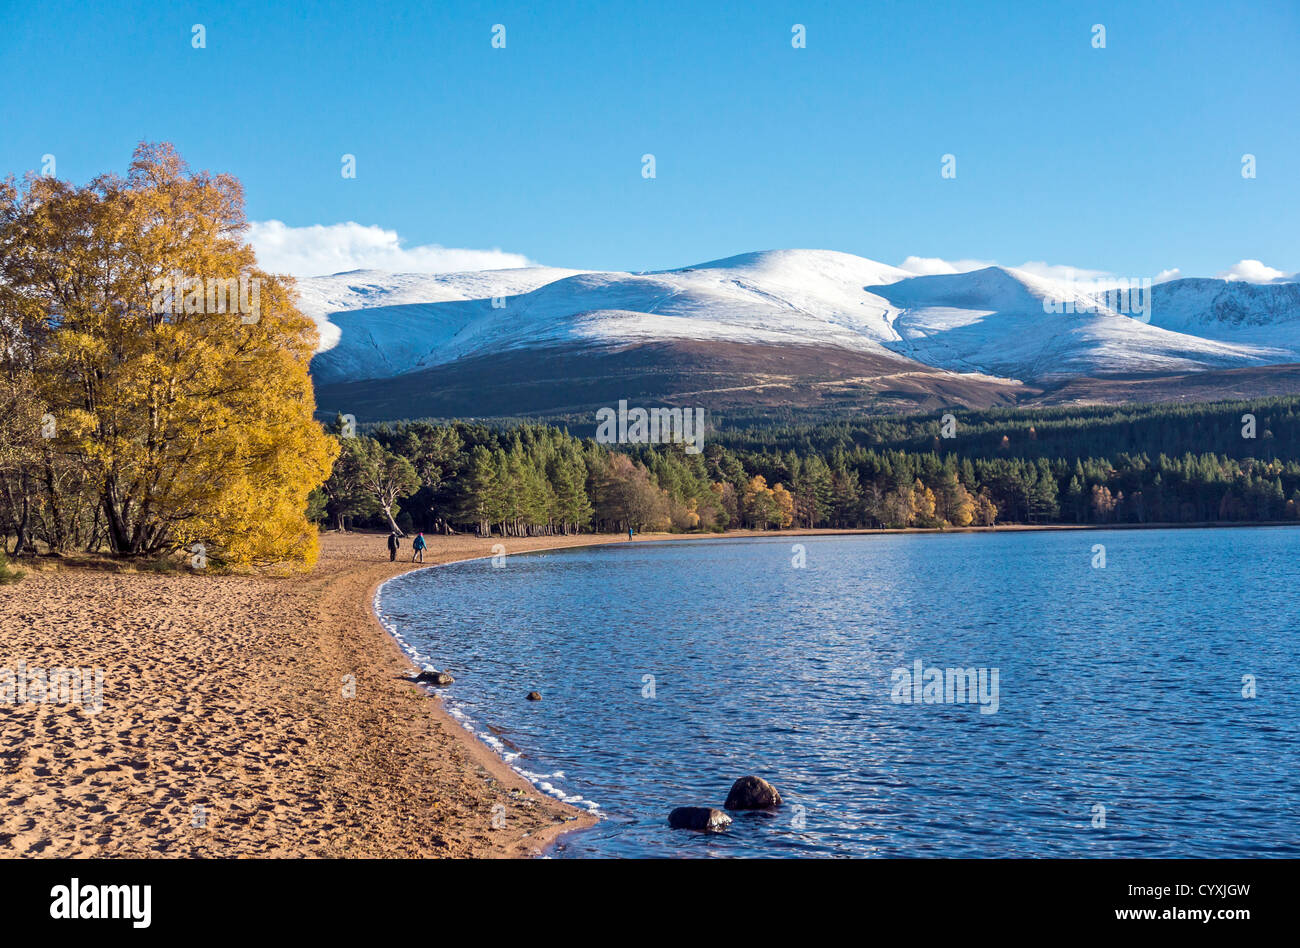 Loch Morlich in the Cairngorms region of Scotland on a calm and sunny autumn day with snow covered Cairn Gorm  mountain left Stock Photo